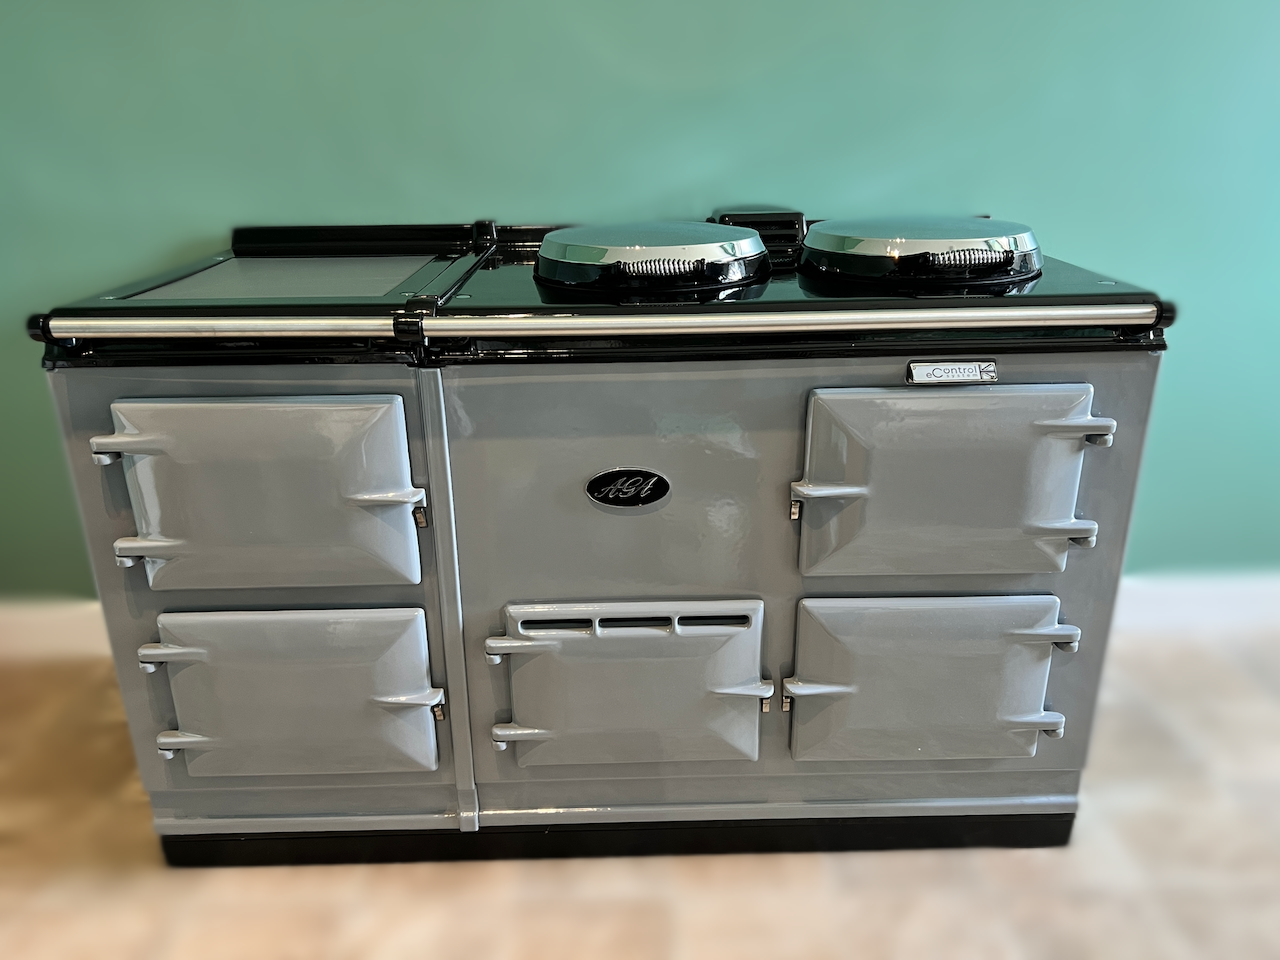 Reconditioned 4 Oven eControl Aga Cooker (Aberdeen Granite)